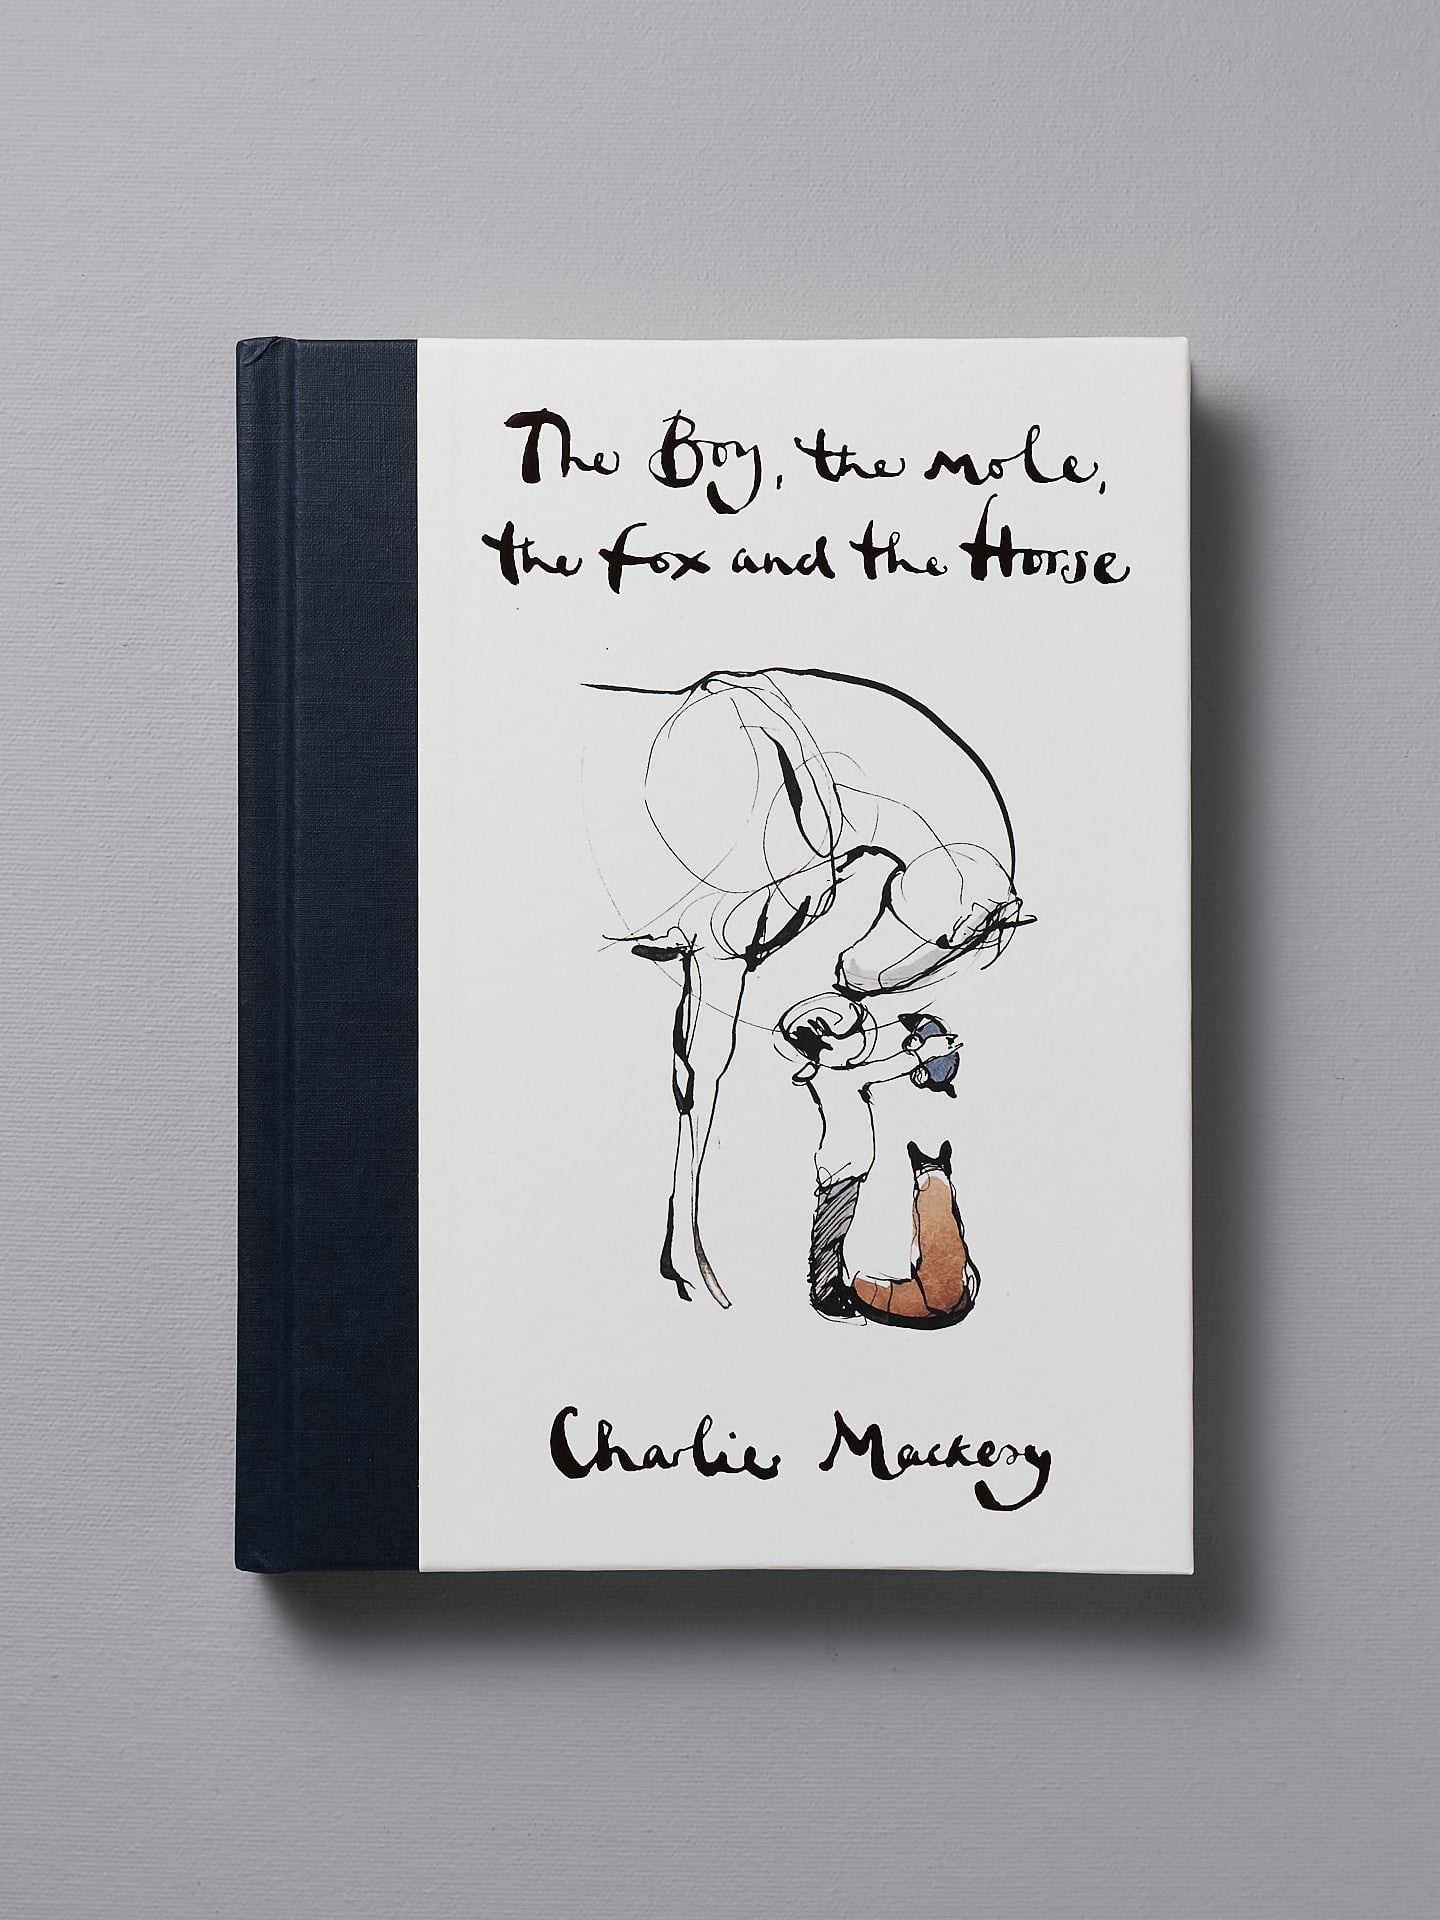 A "The Boy, the Mole, the Fox and the Horse" by Charlie Mackesy with a picture of a horse and a dog.